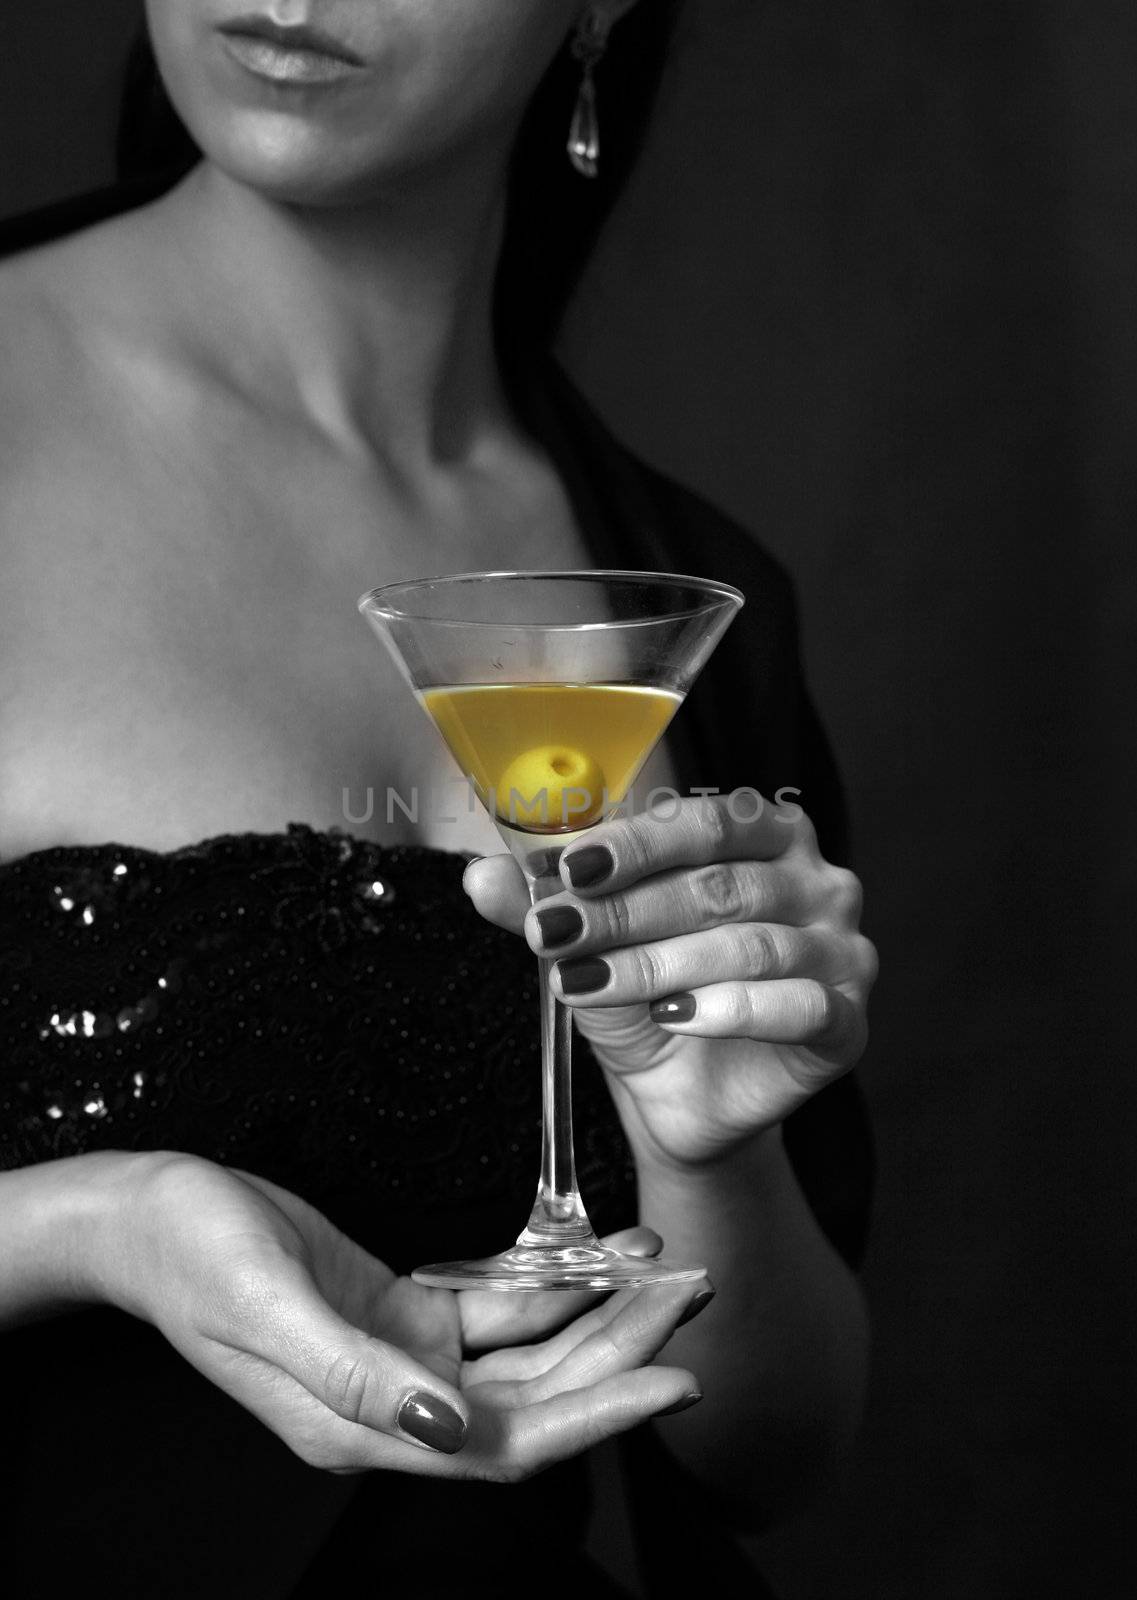 The image of a glass from martinis in a female hand on a black background